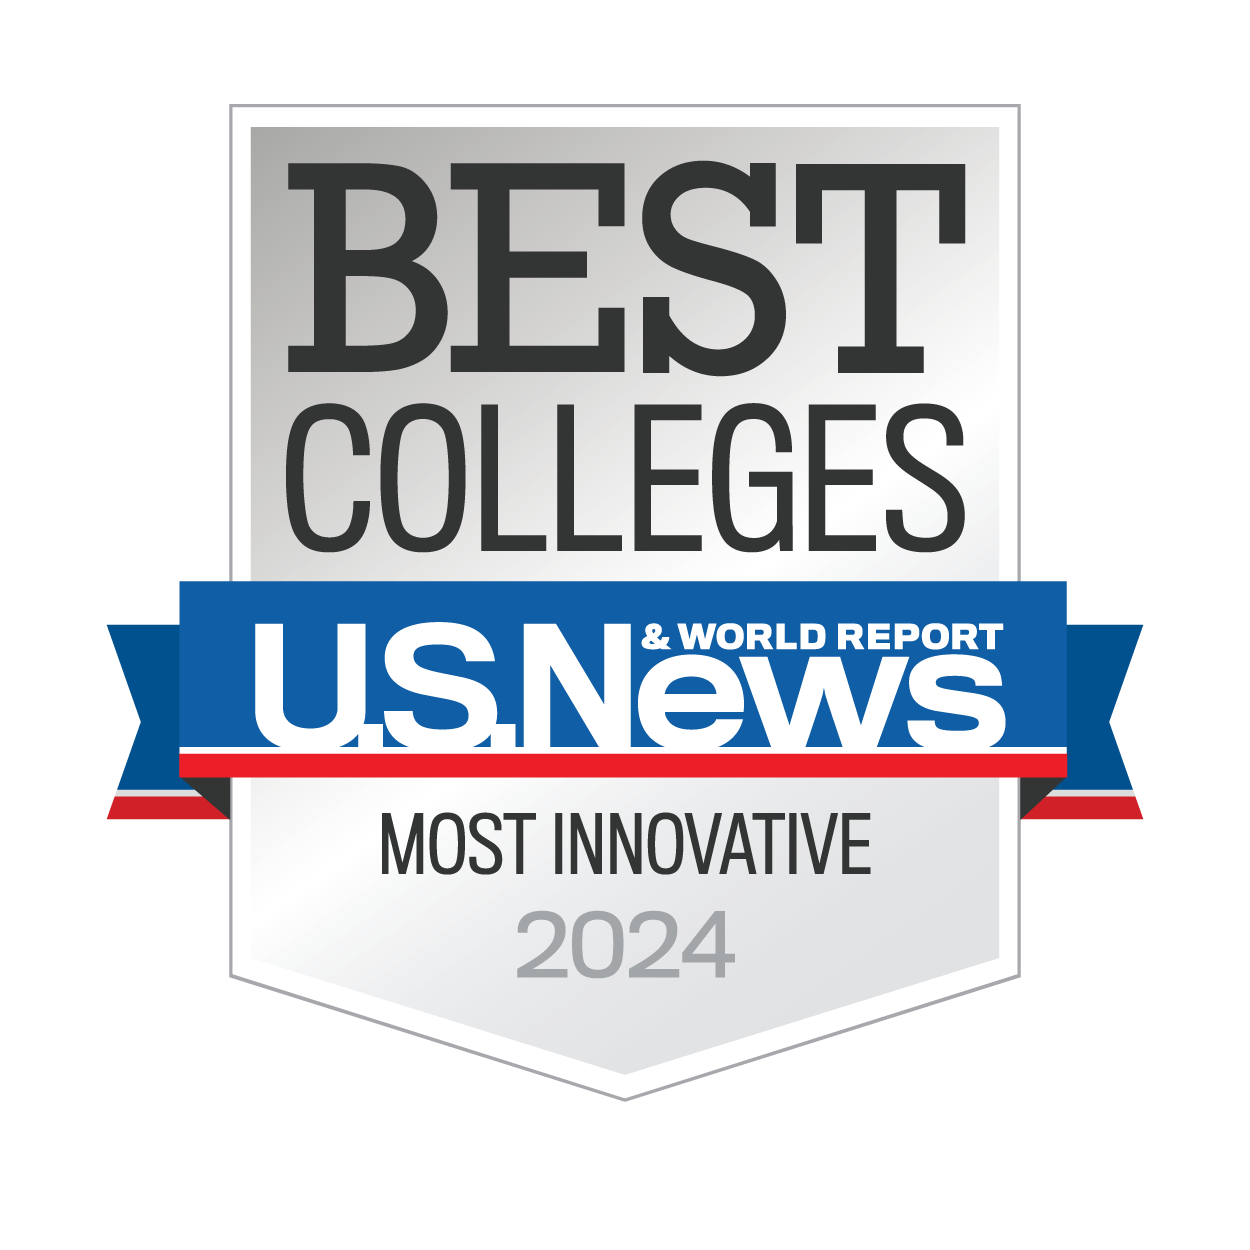 U.S. News Best Colleges Most Innovative 2020